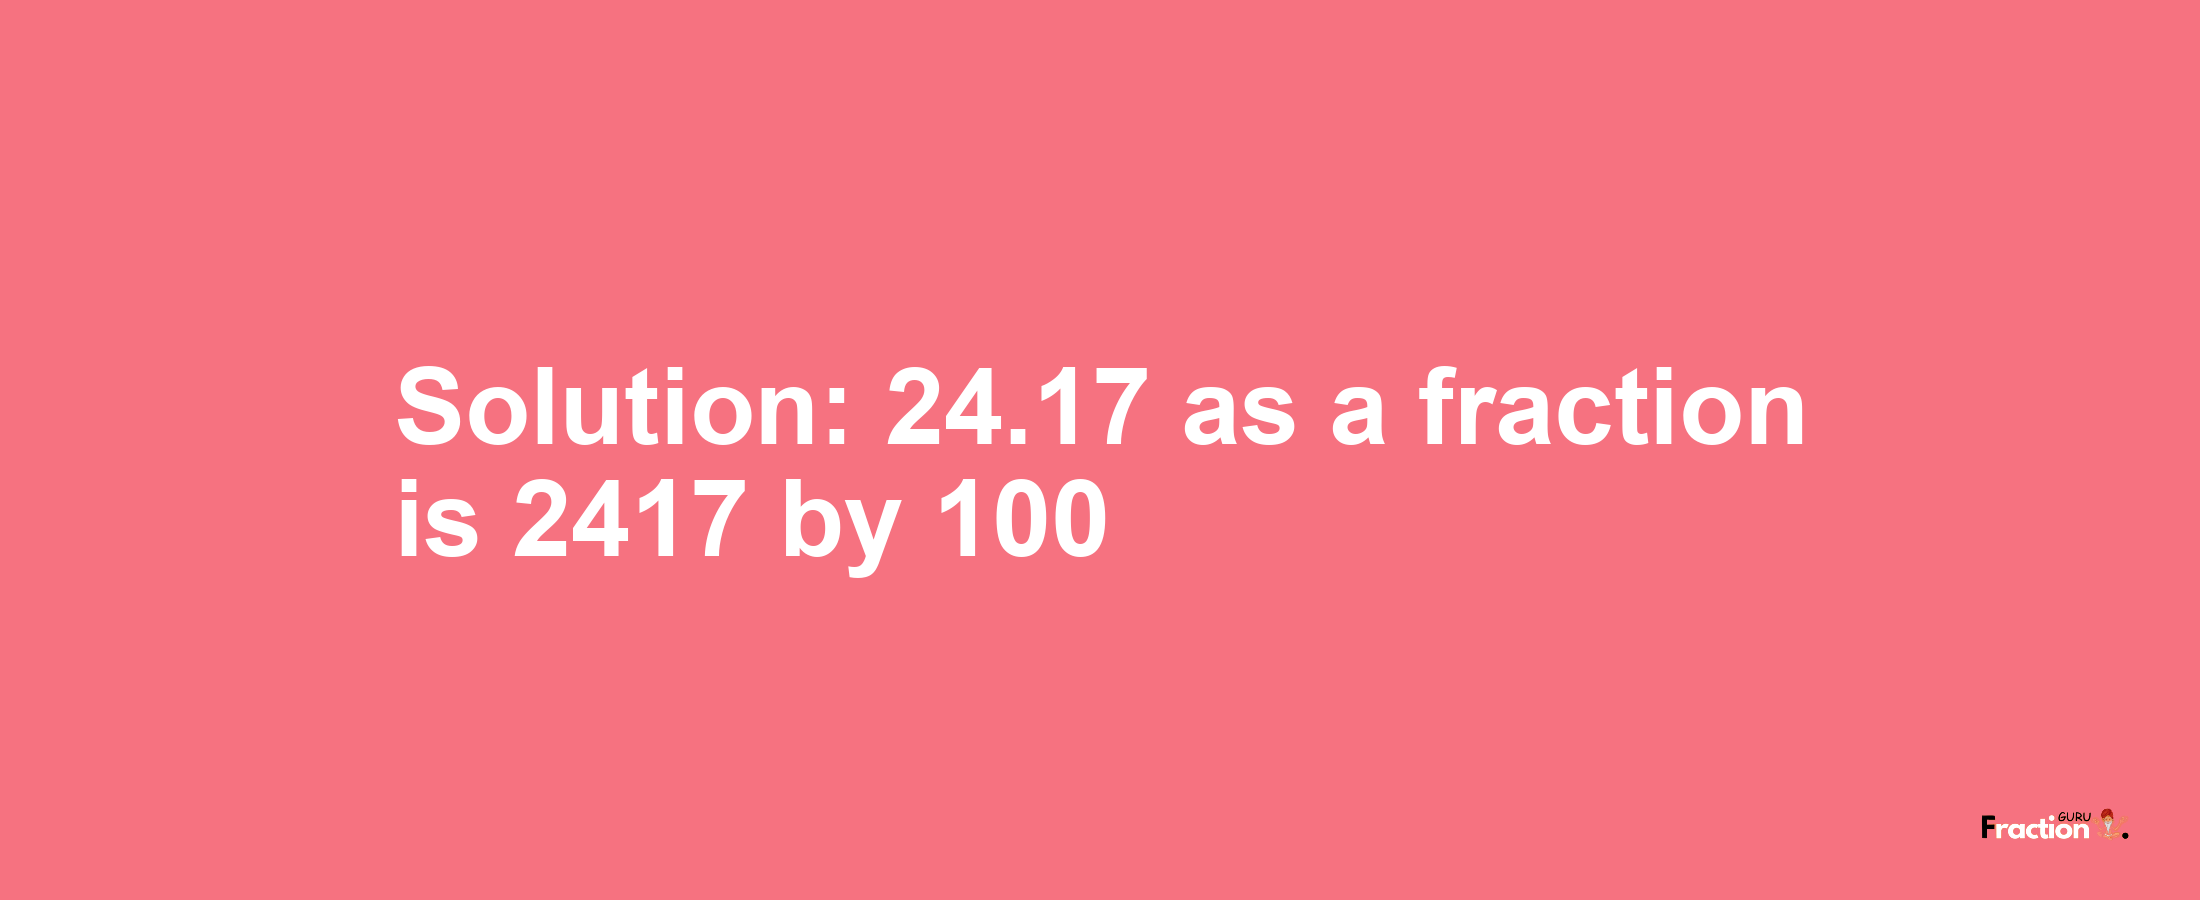 Solution:24.17 as a fraction is 2417/100